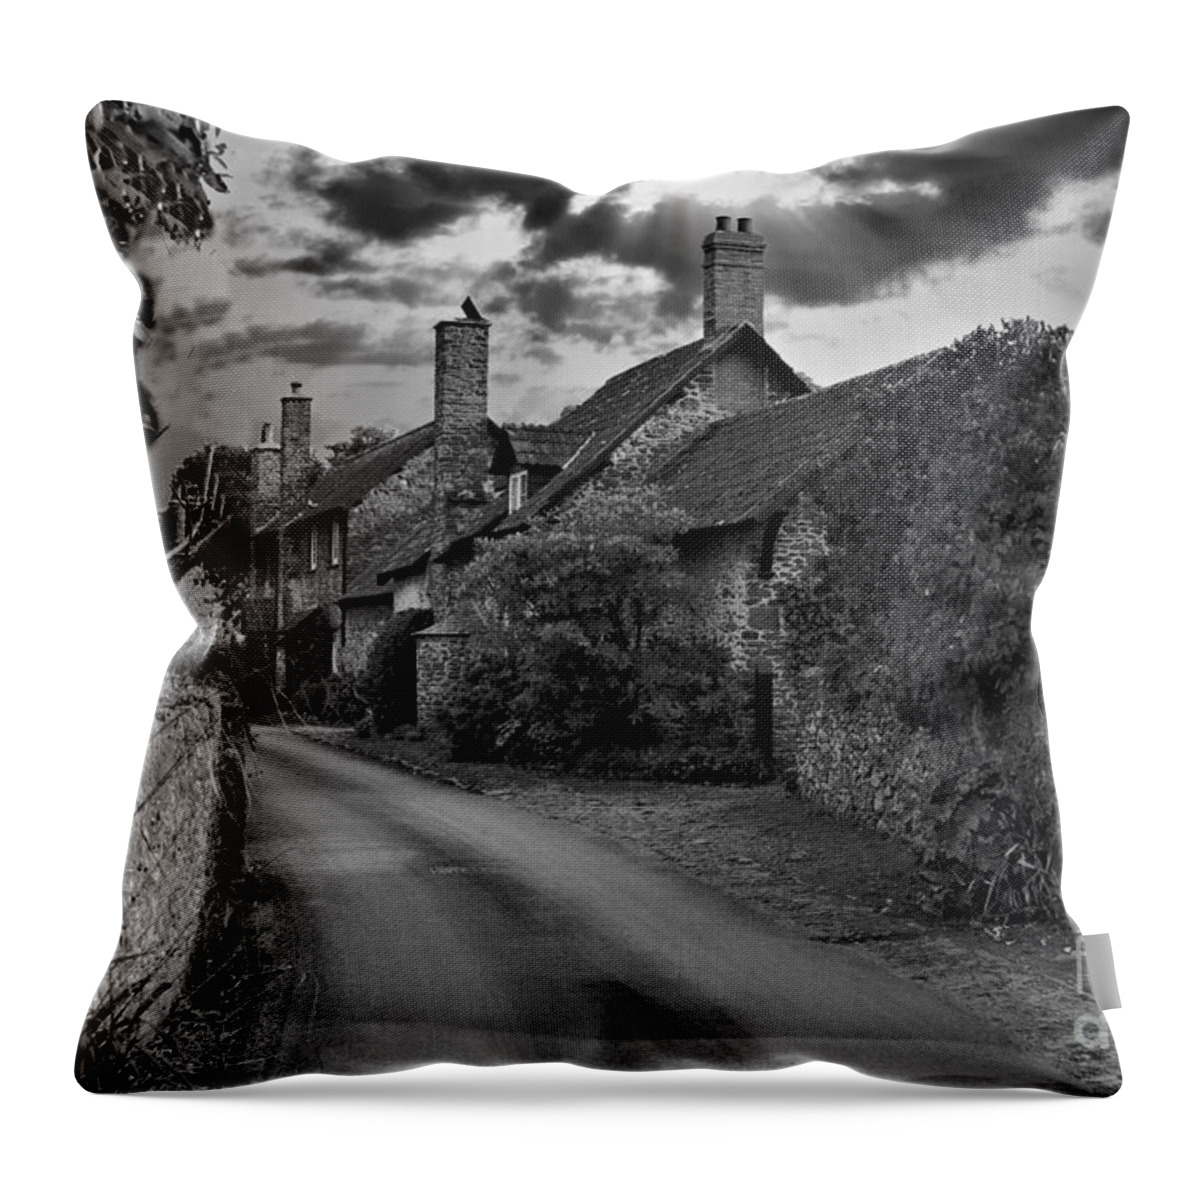 Black And White Throw Pillow featuring the photograph Timeless Bossingham by Richard Denyer